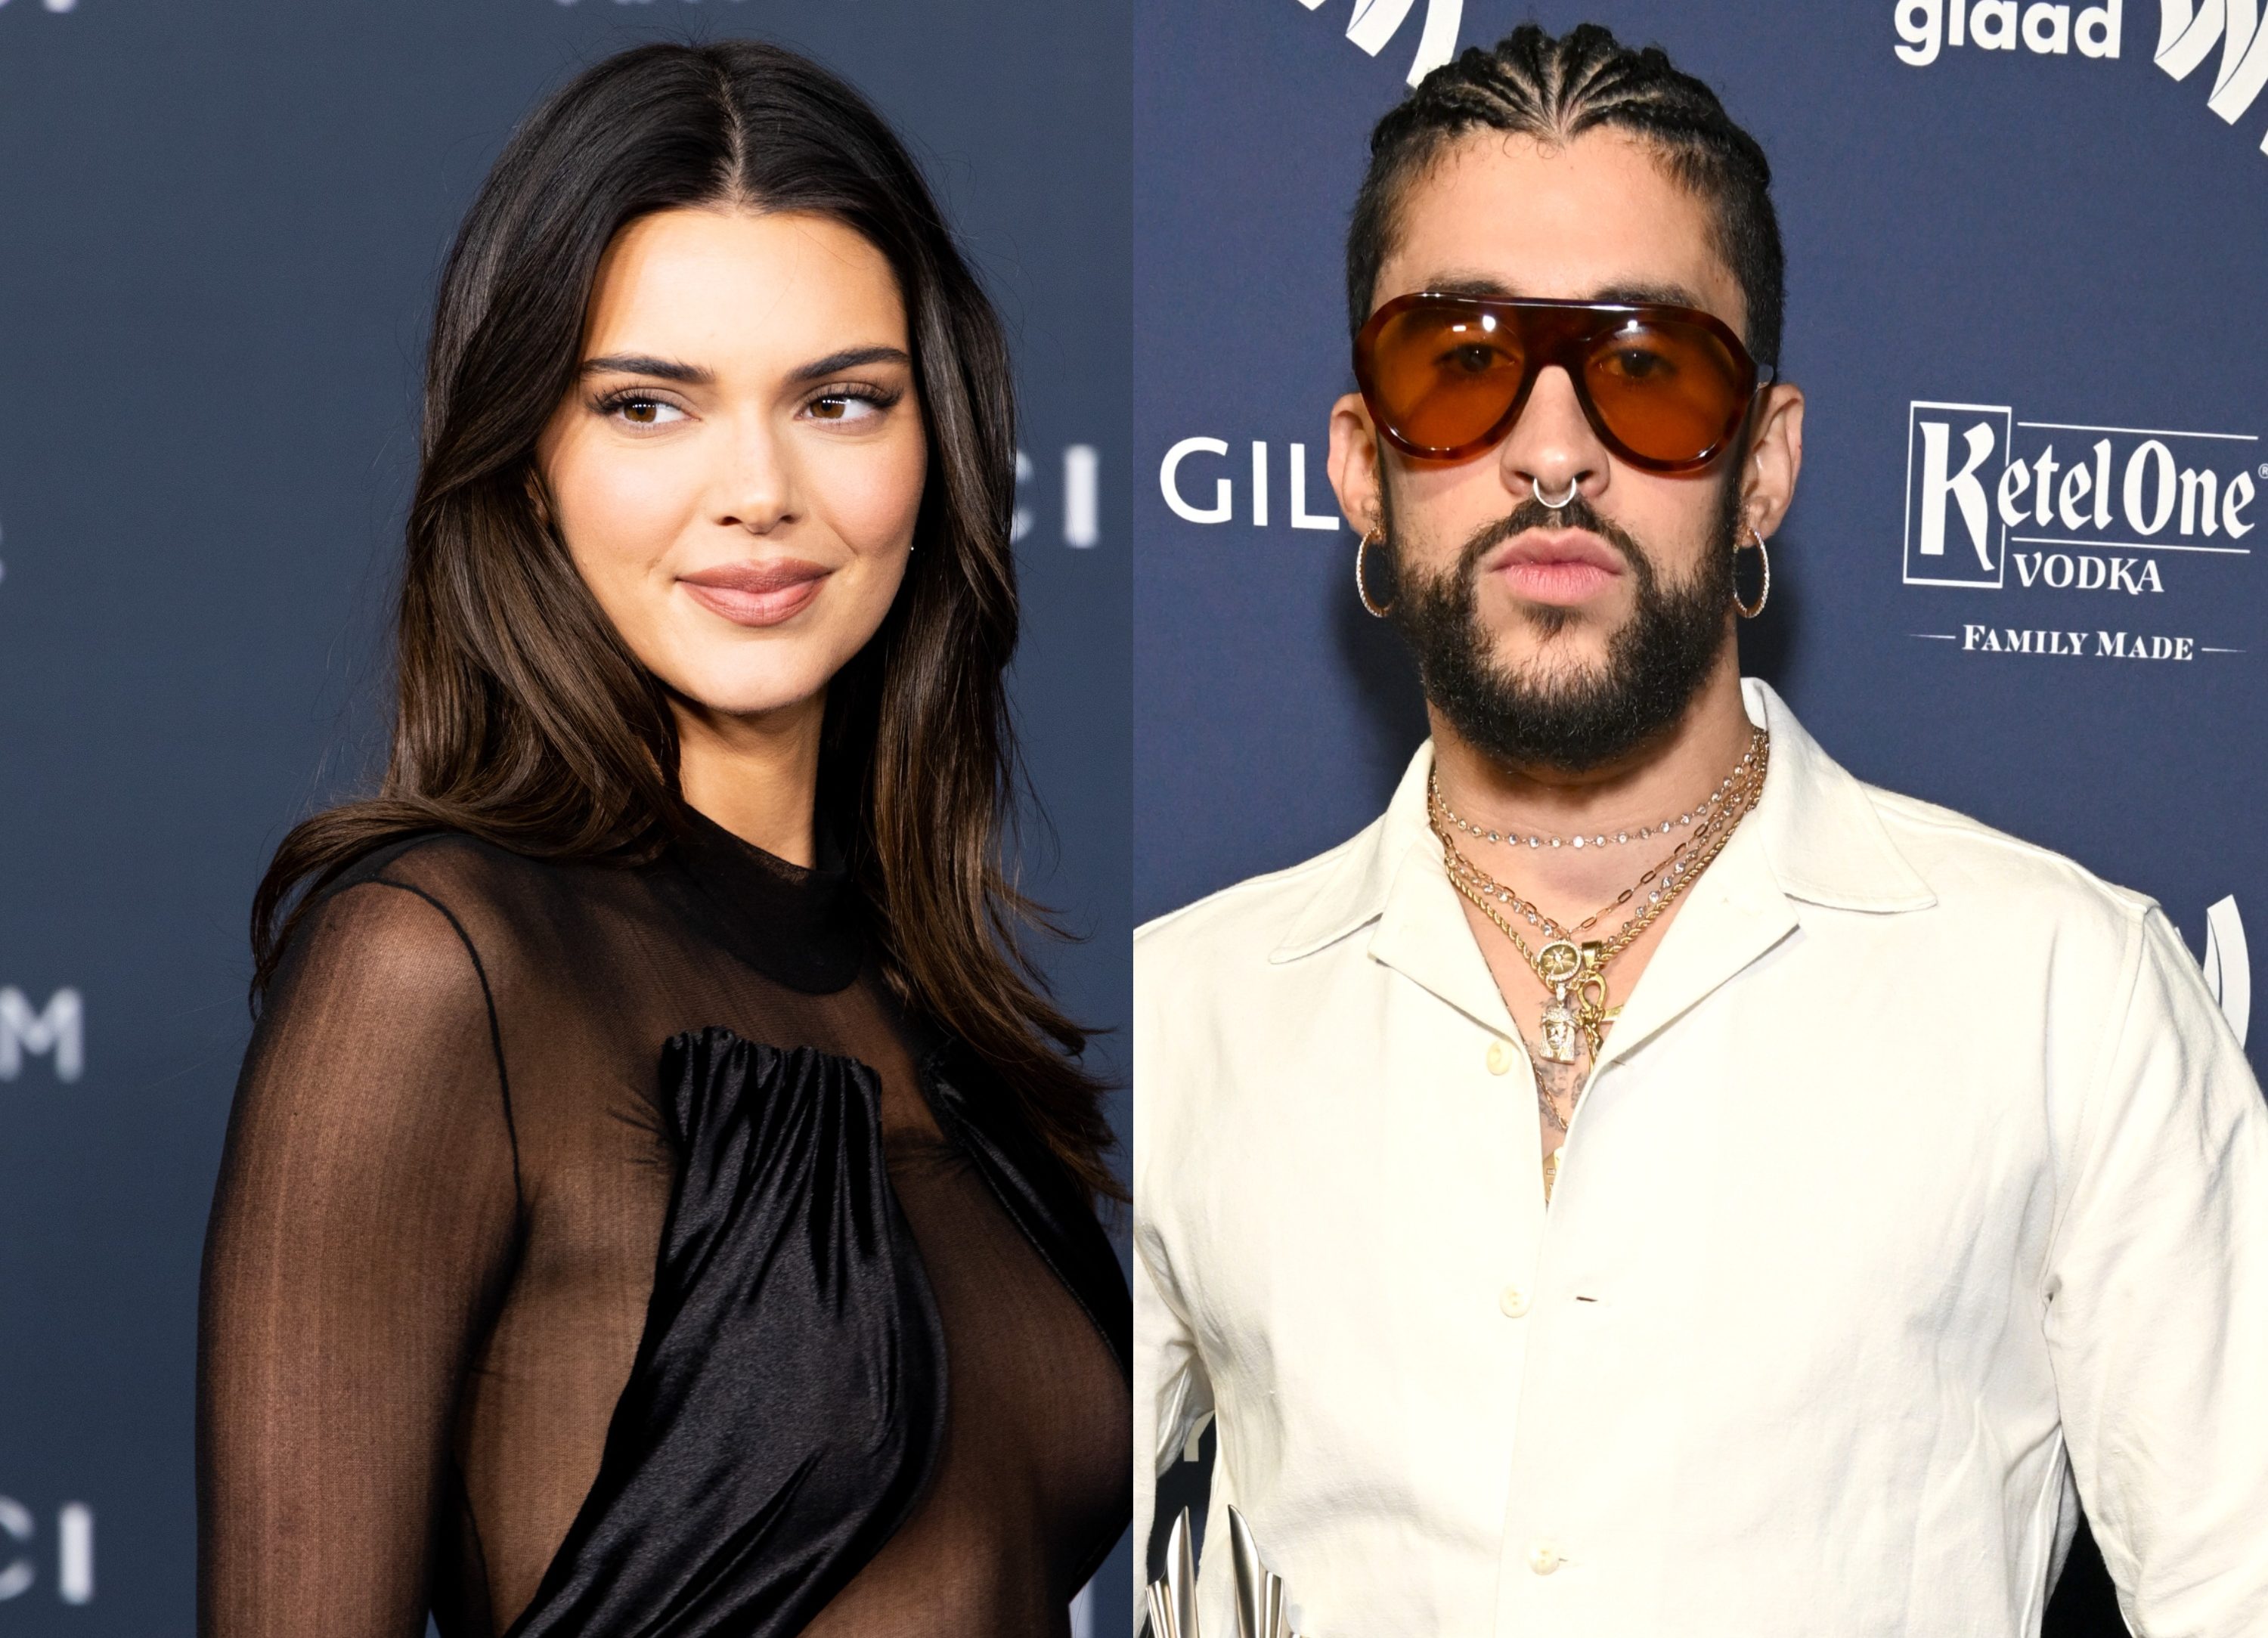 Kendall Jenner and Bad Bunny Enjoy Early Fall Date Night in NYC at